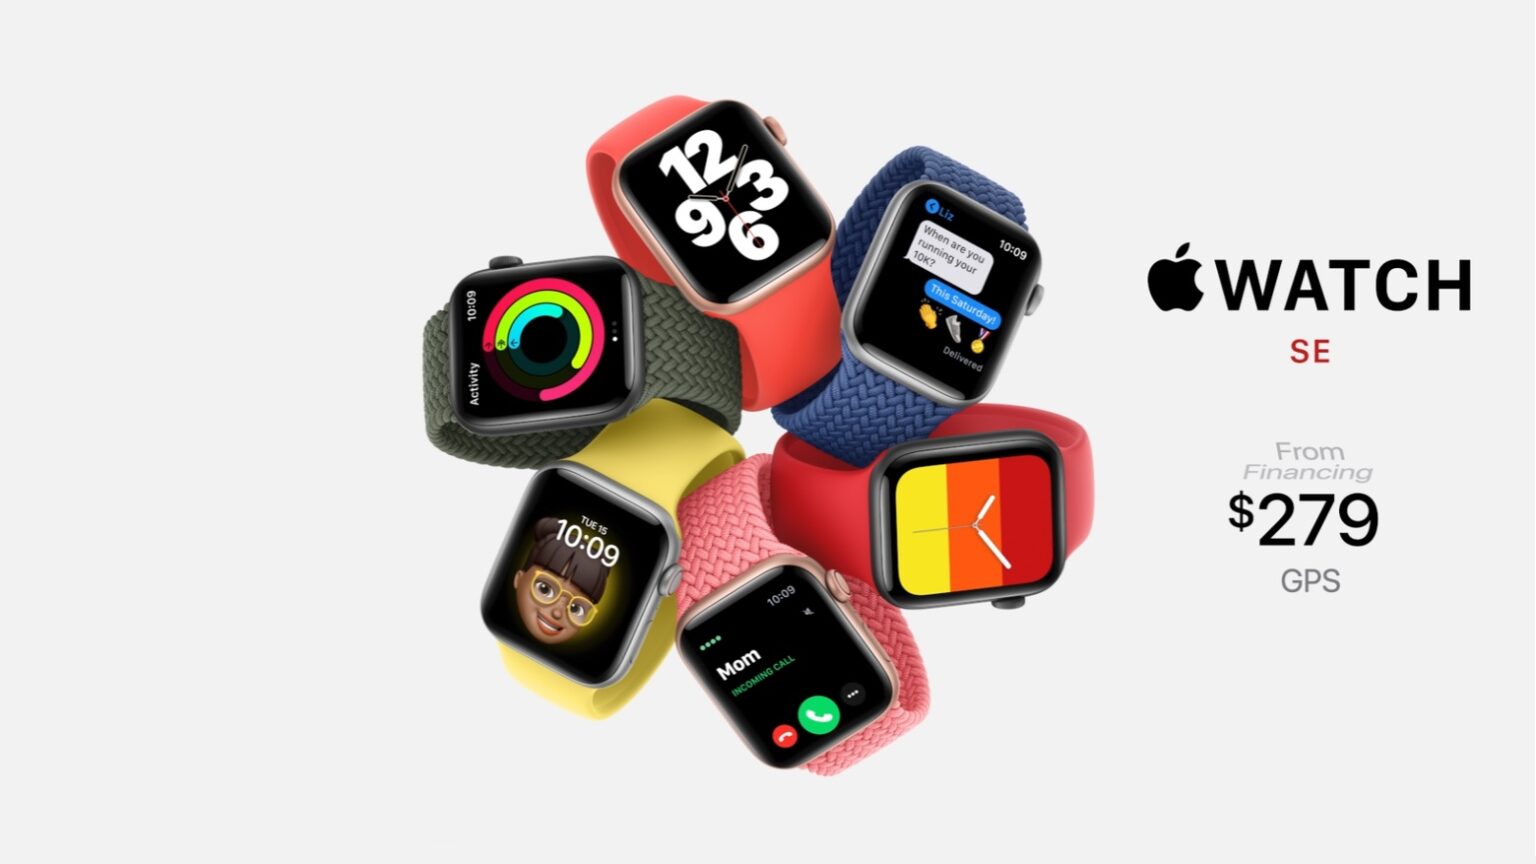 Apple Watch SE is only $279